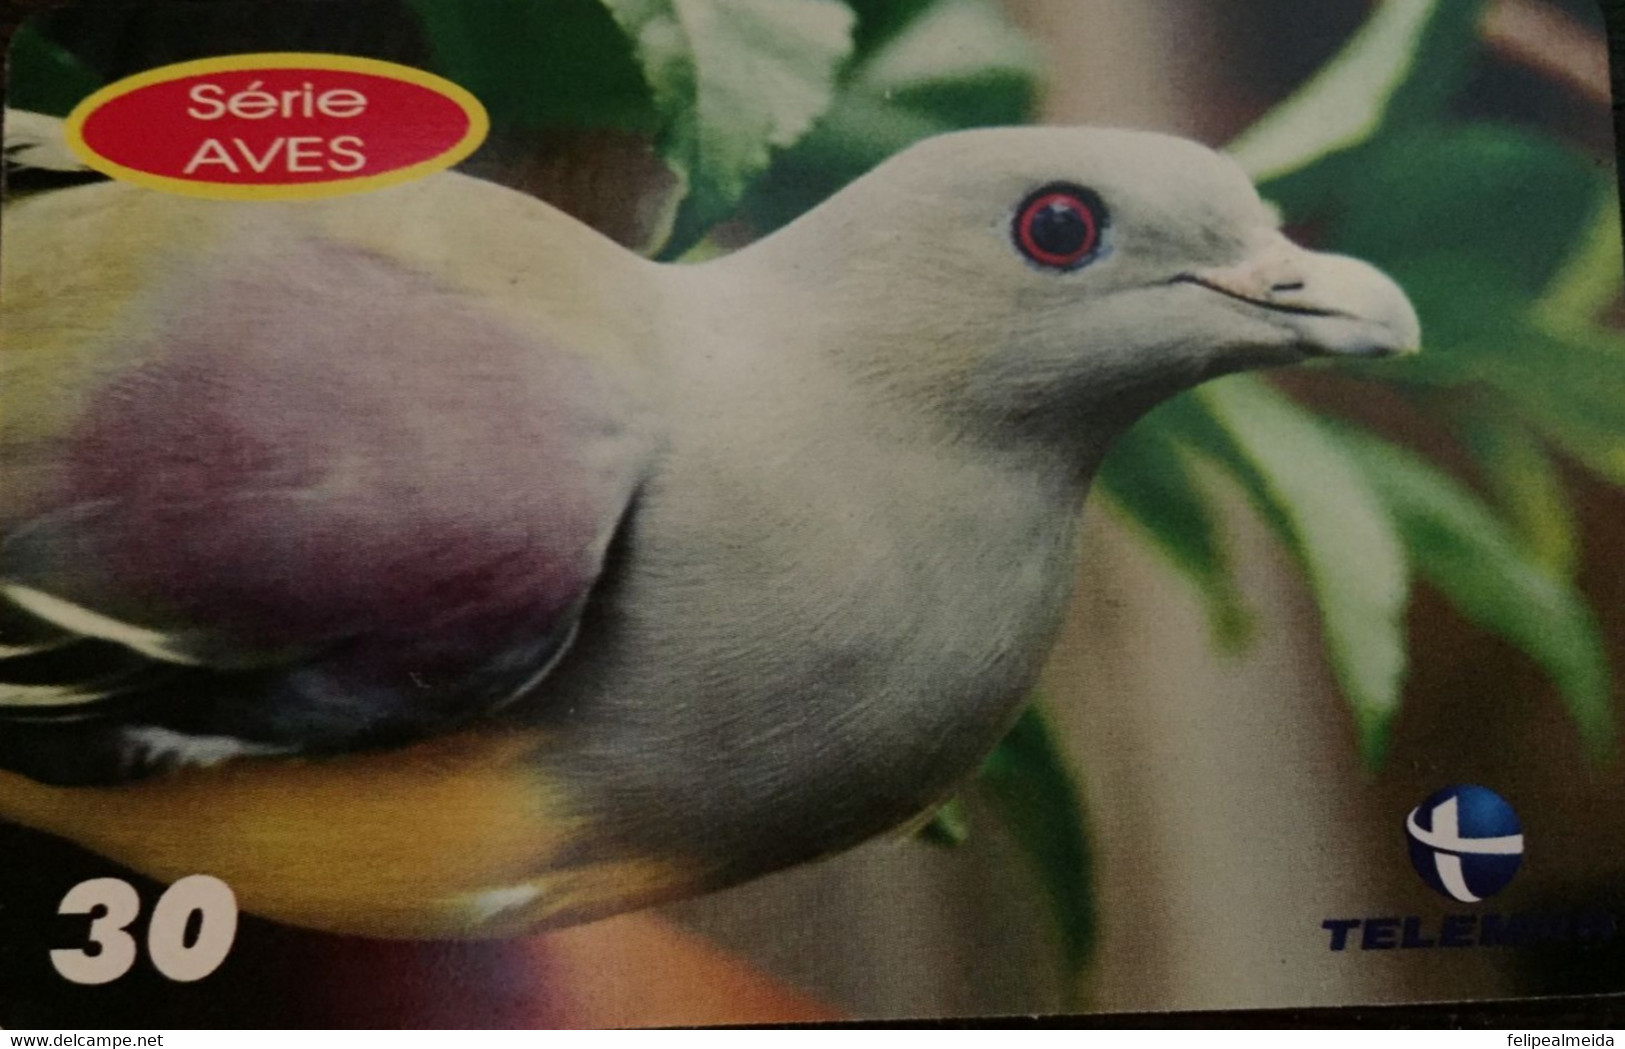 Phone Card Manufactured By Telemars In 2001 - Birds Special Series - Pomba-treron Species - Arenden & Roofvogels